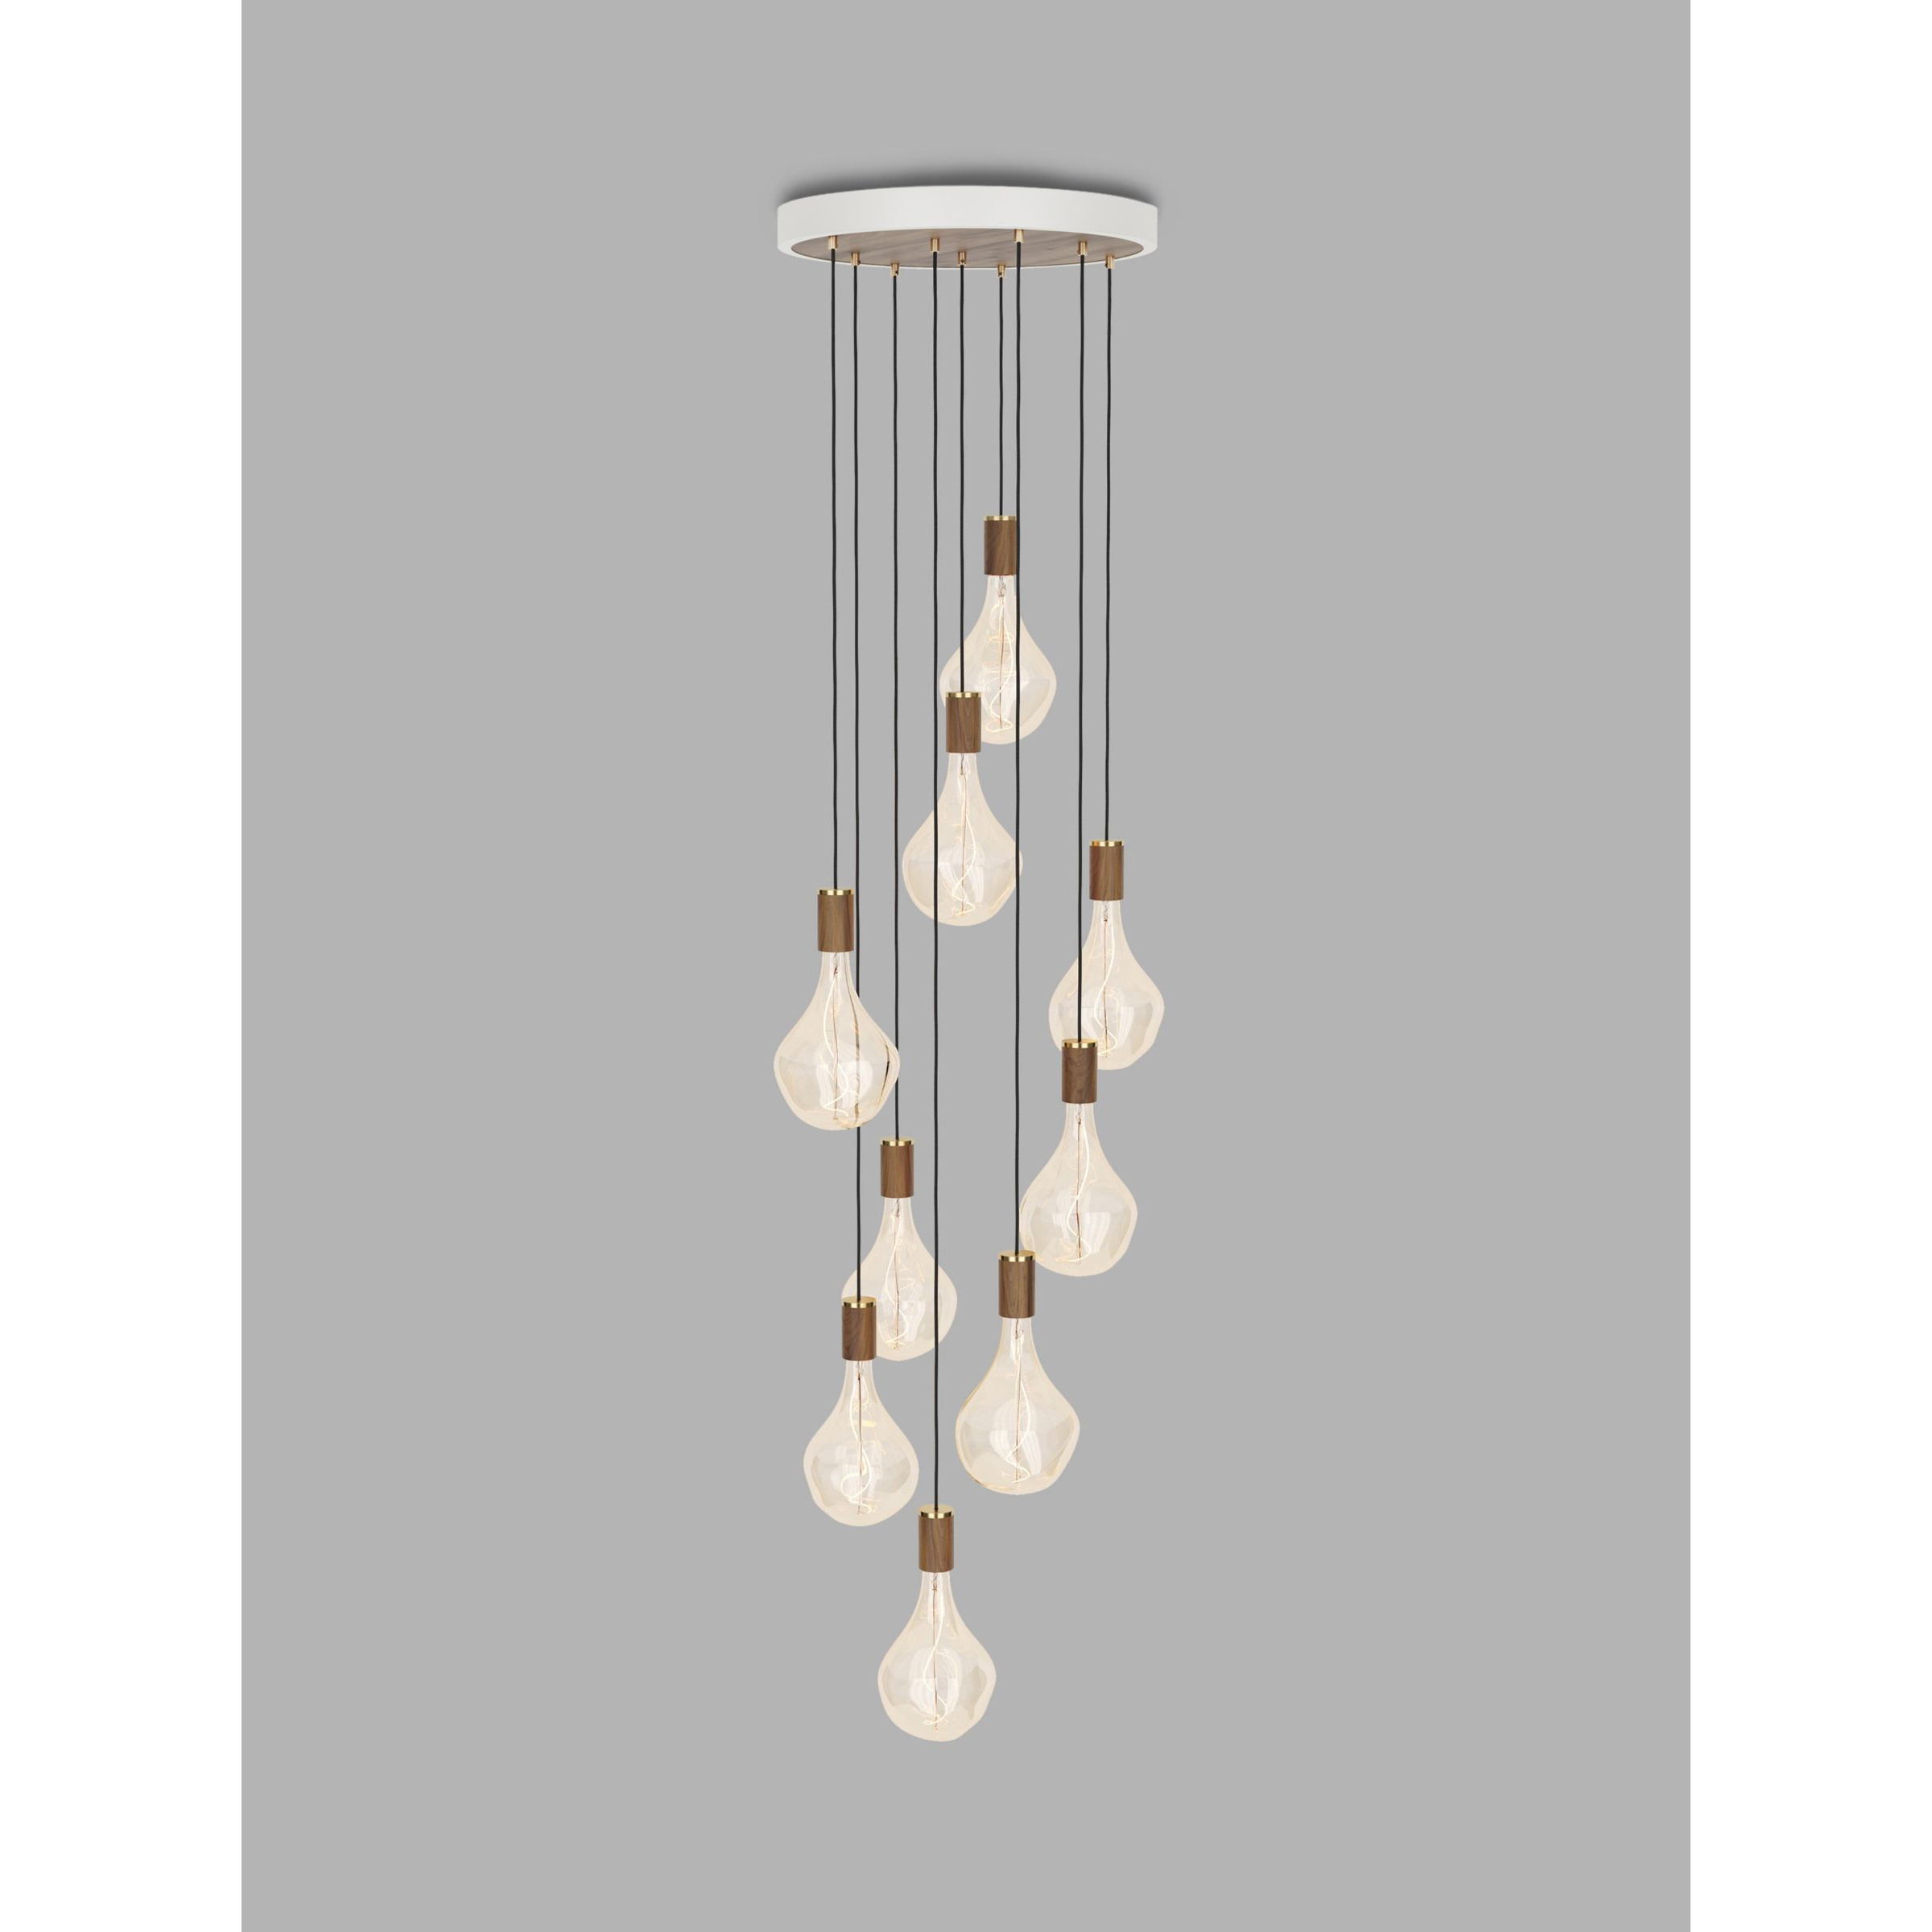 Tala Walnut Nine Pendant Cluster Ceiling Light with Voronoi II 3W ES LED Dimmable Tinted Bulbs, White - image 1